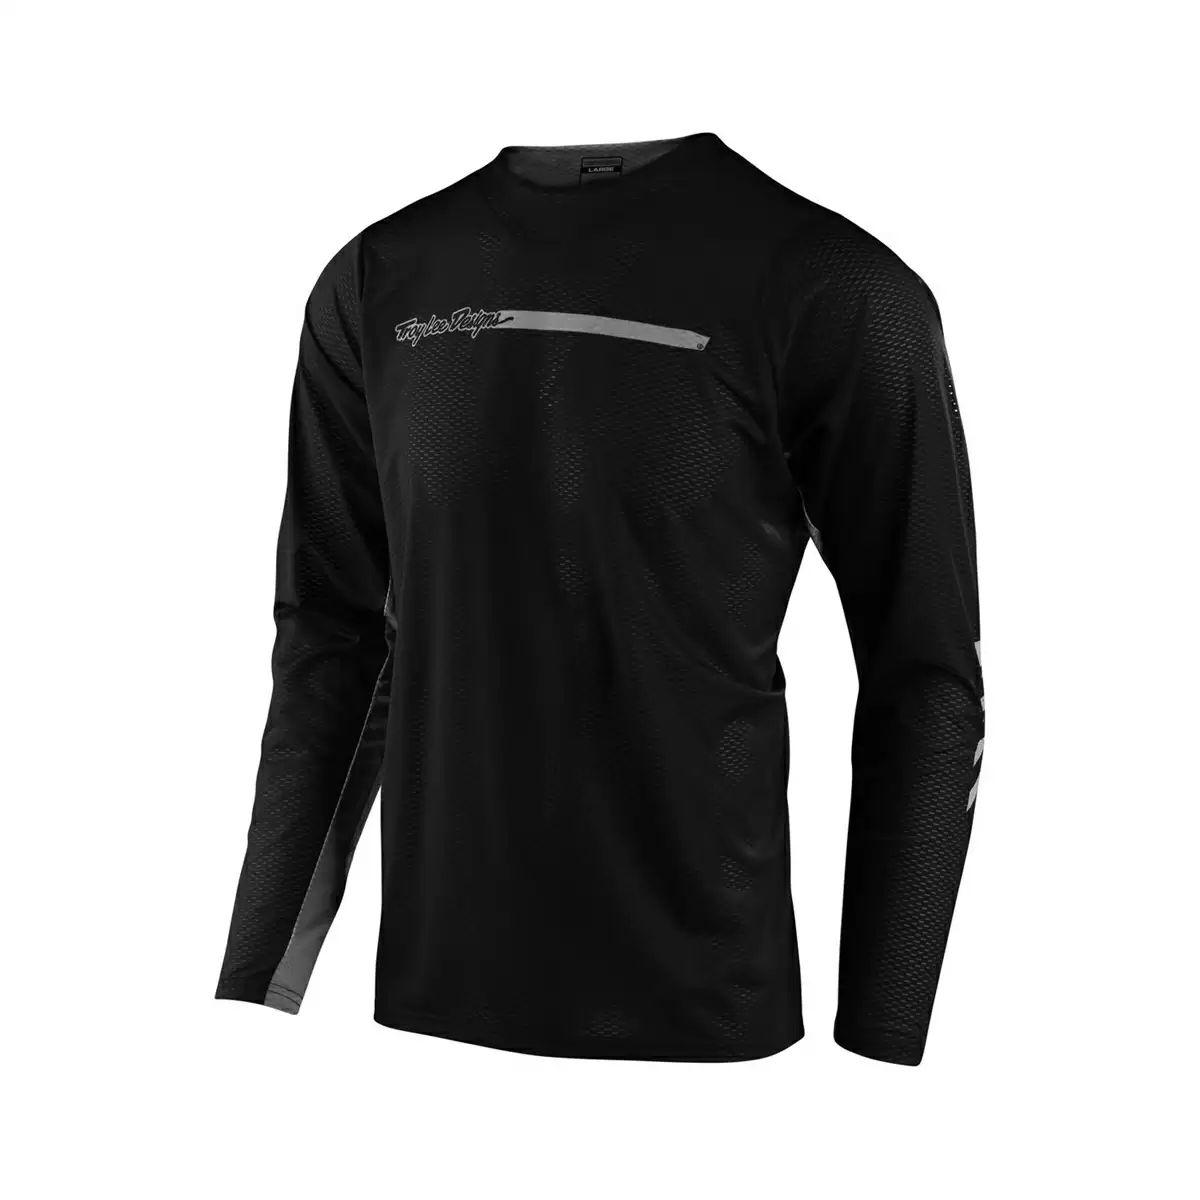 Jersey Skyline Air Channel Long-Sleeve Black Size M - image